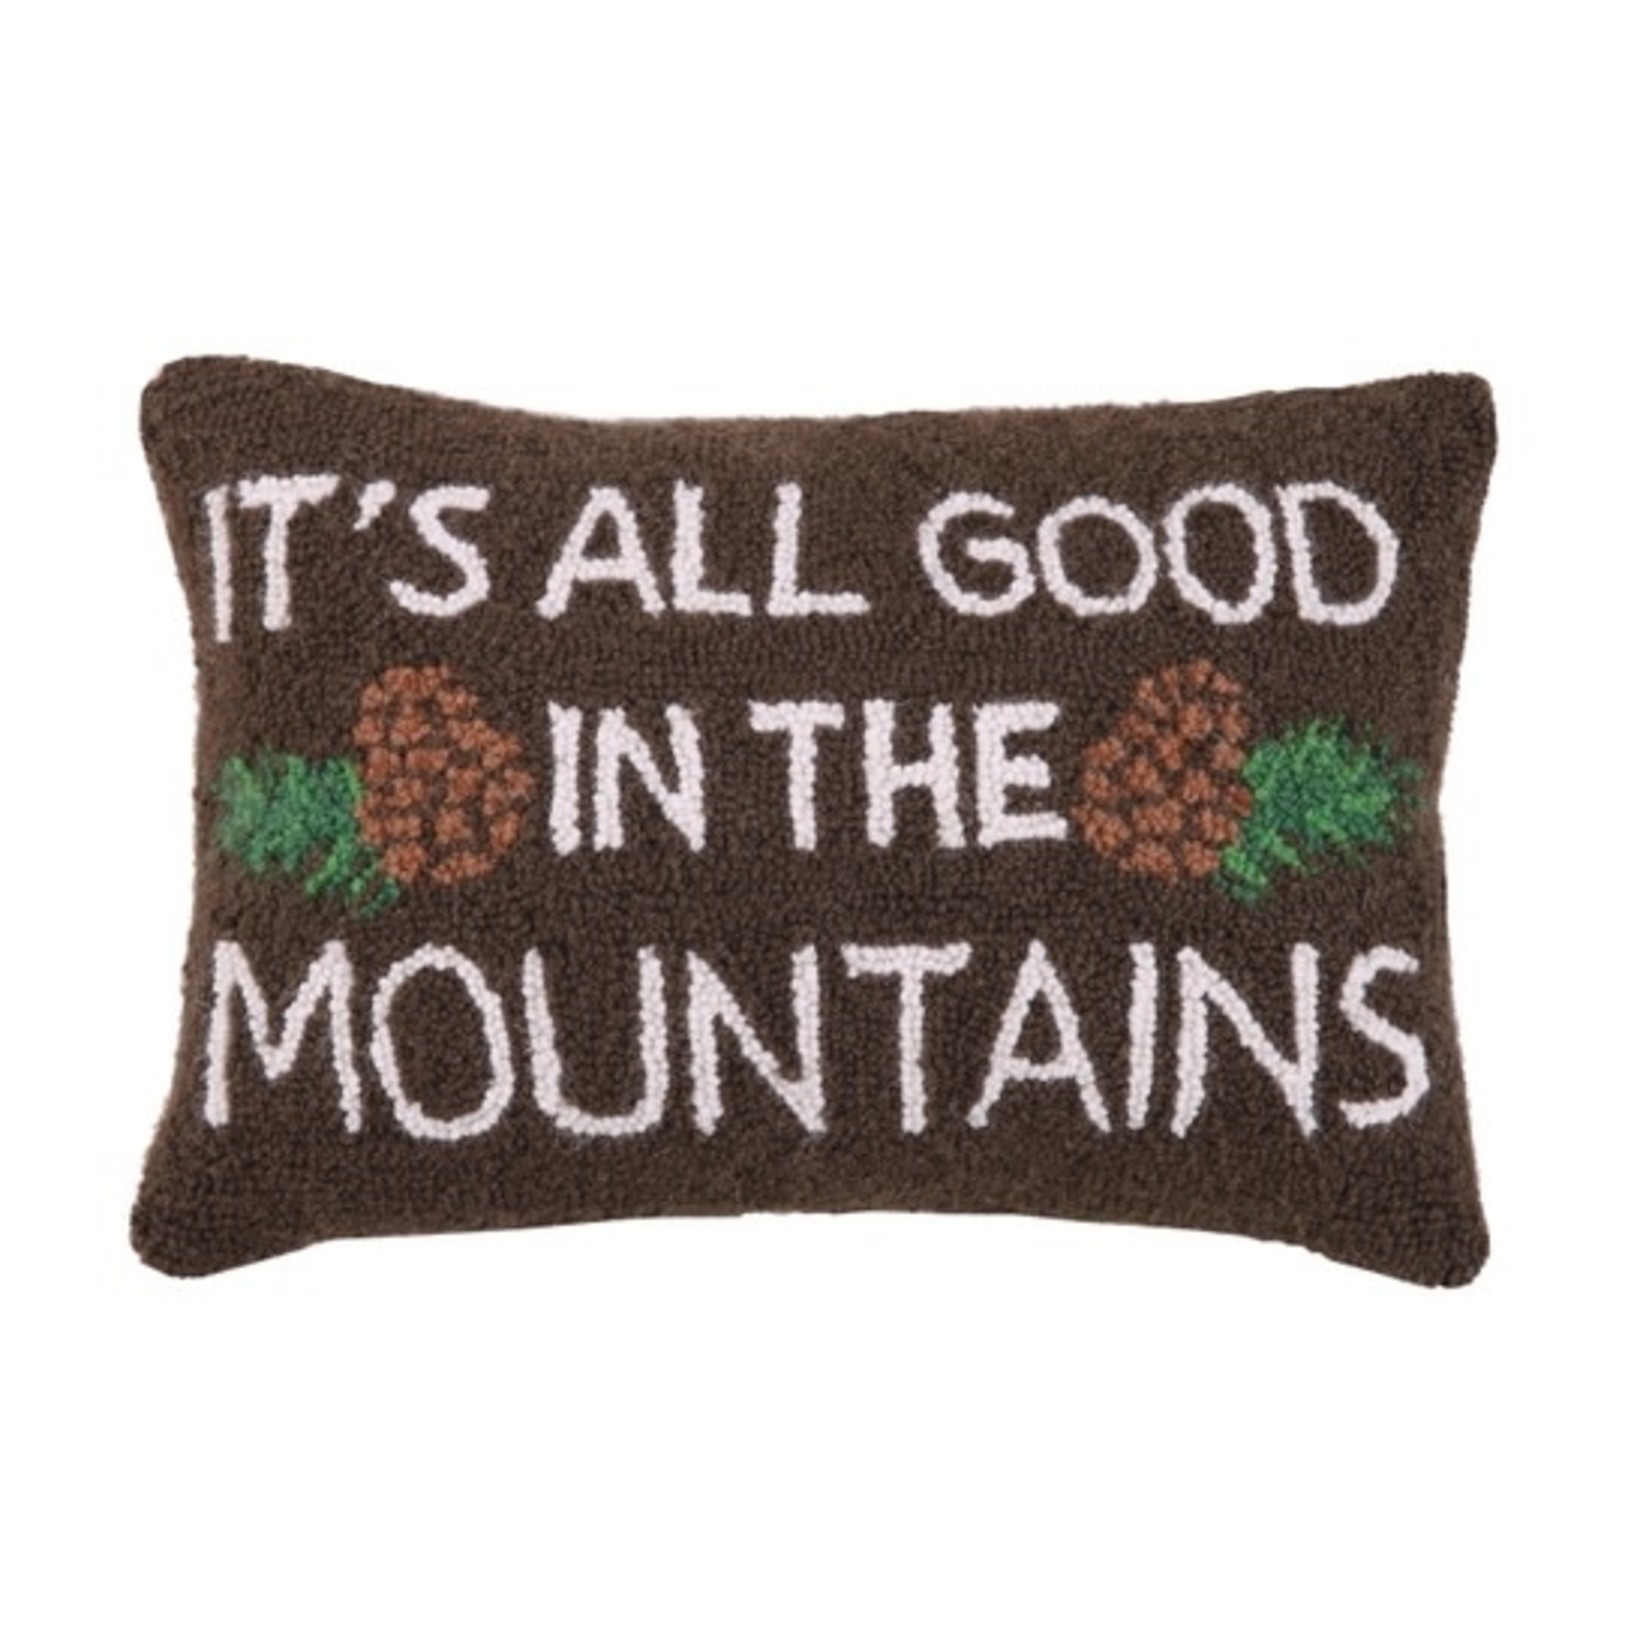 Pillows - Hooked All Good In The Mountains Pillow